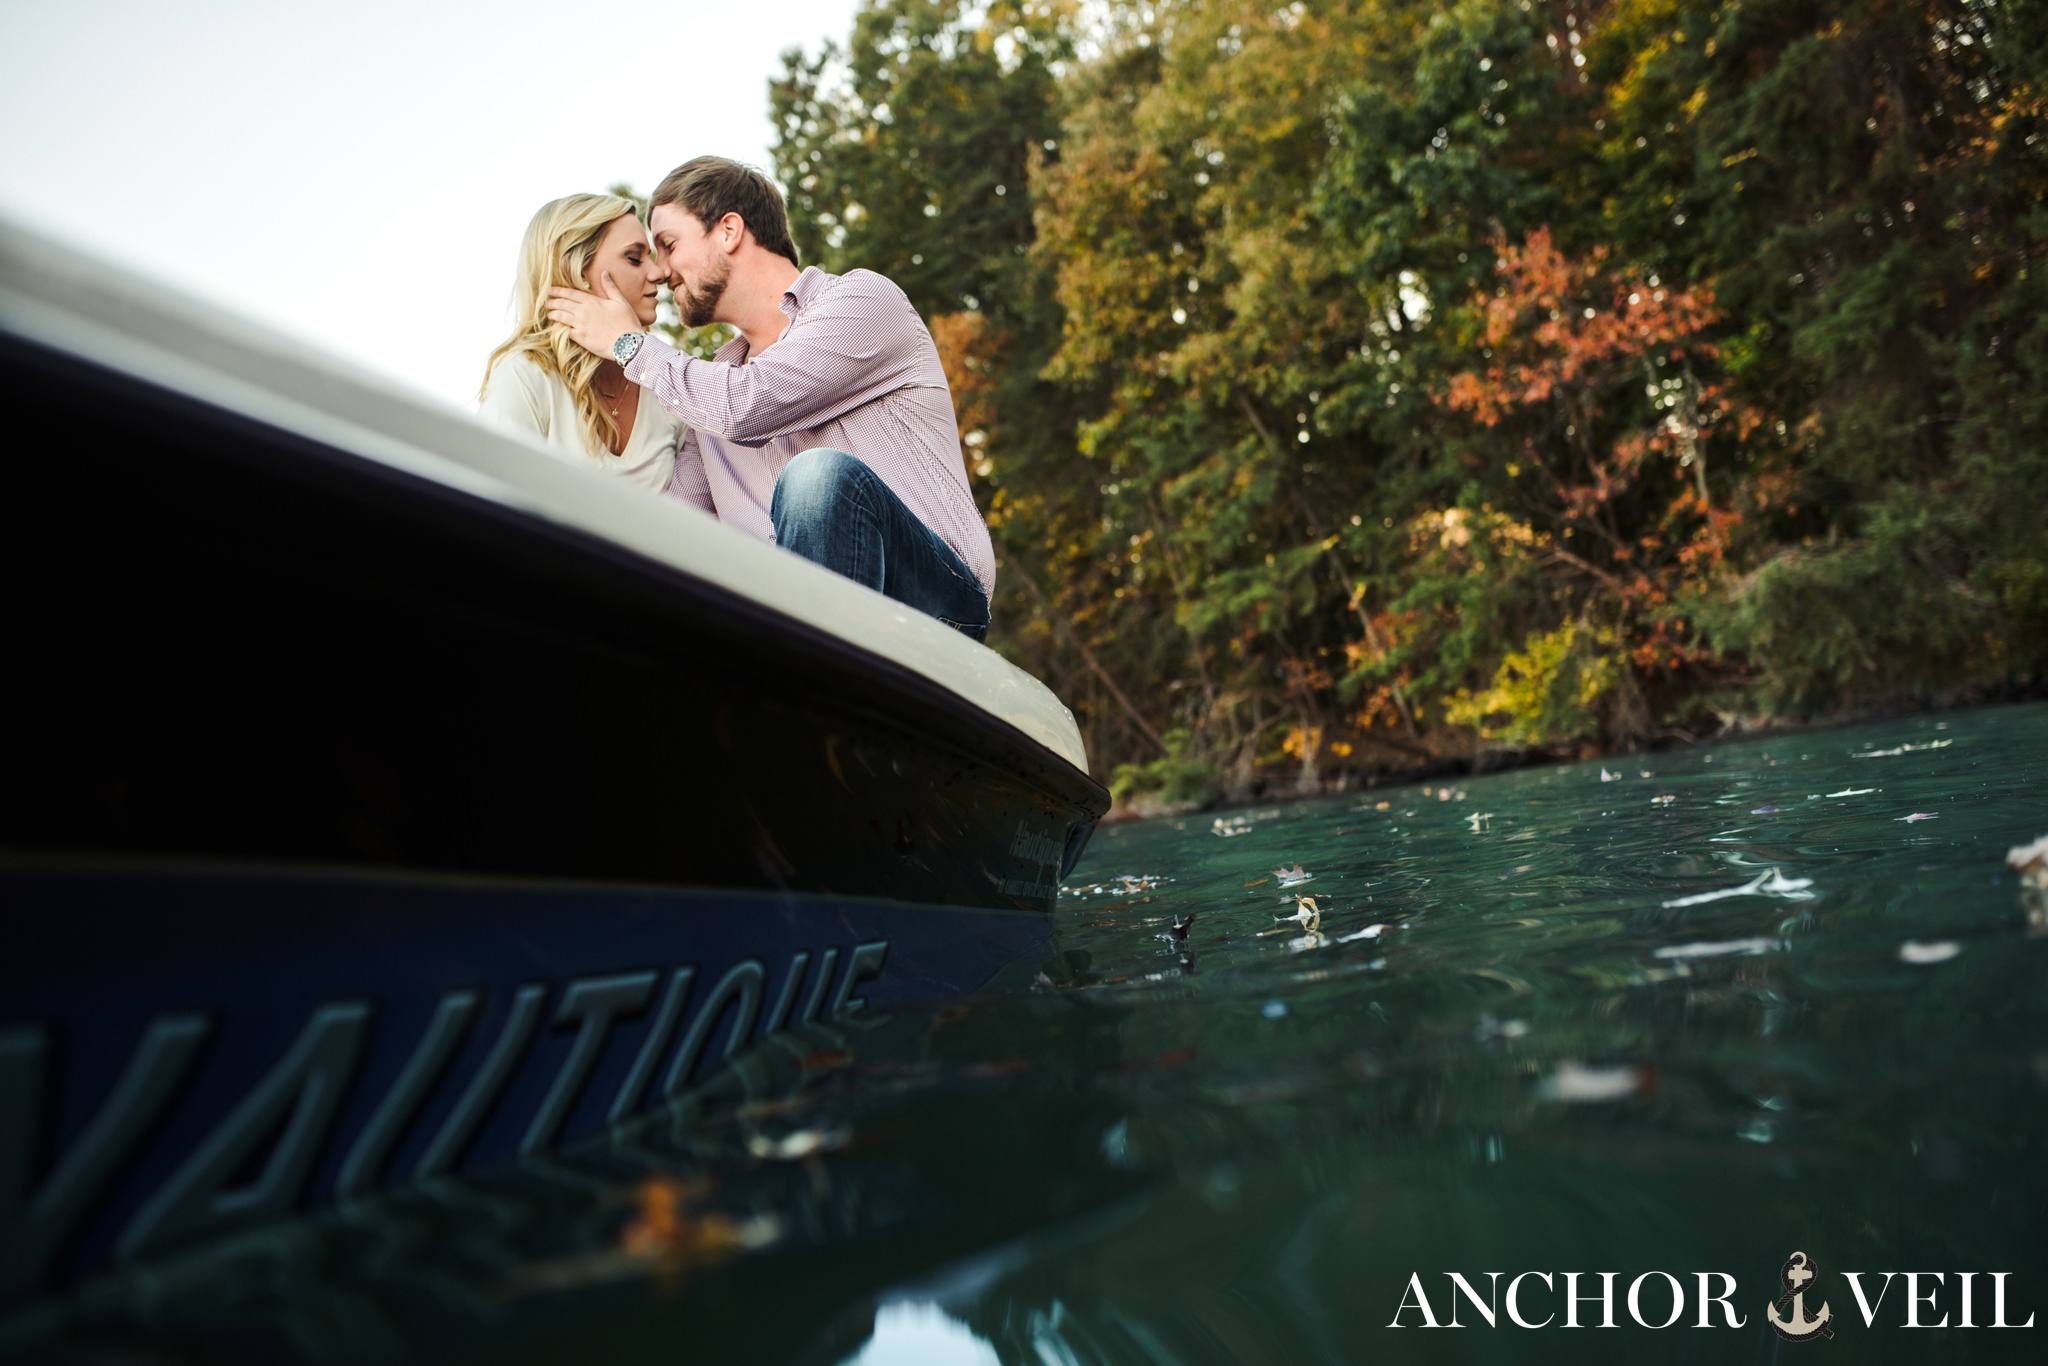 kissing on the back of the boat from in the water during the belews lake engagement session